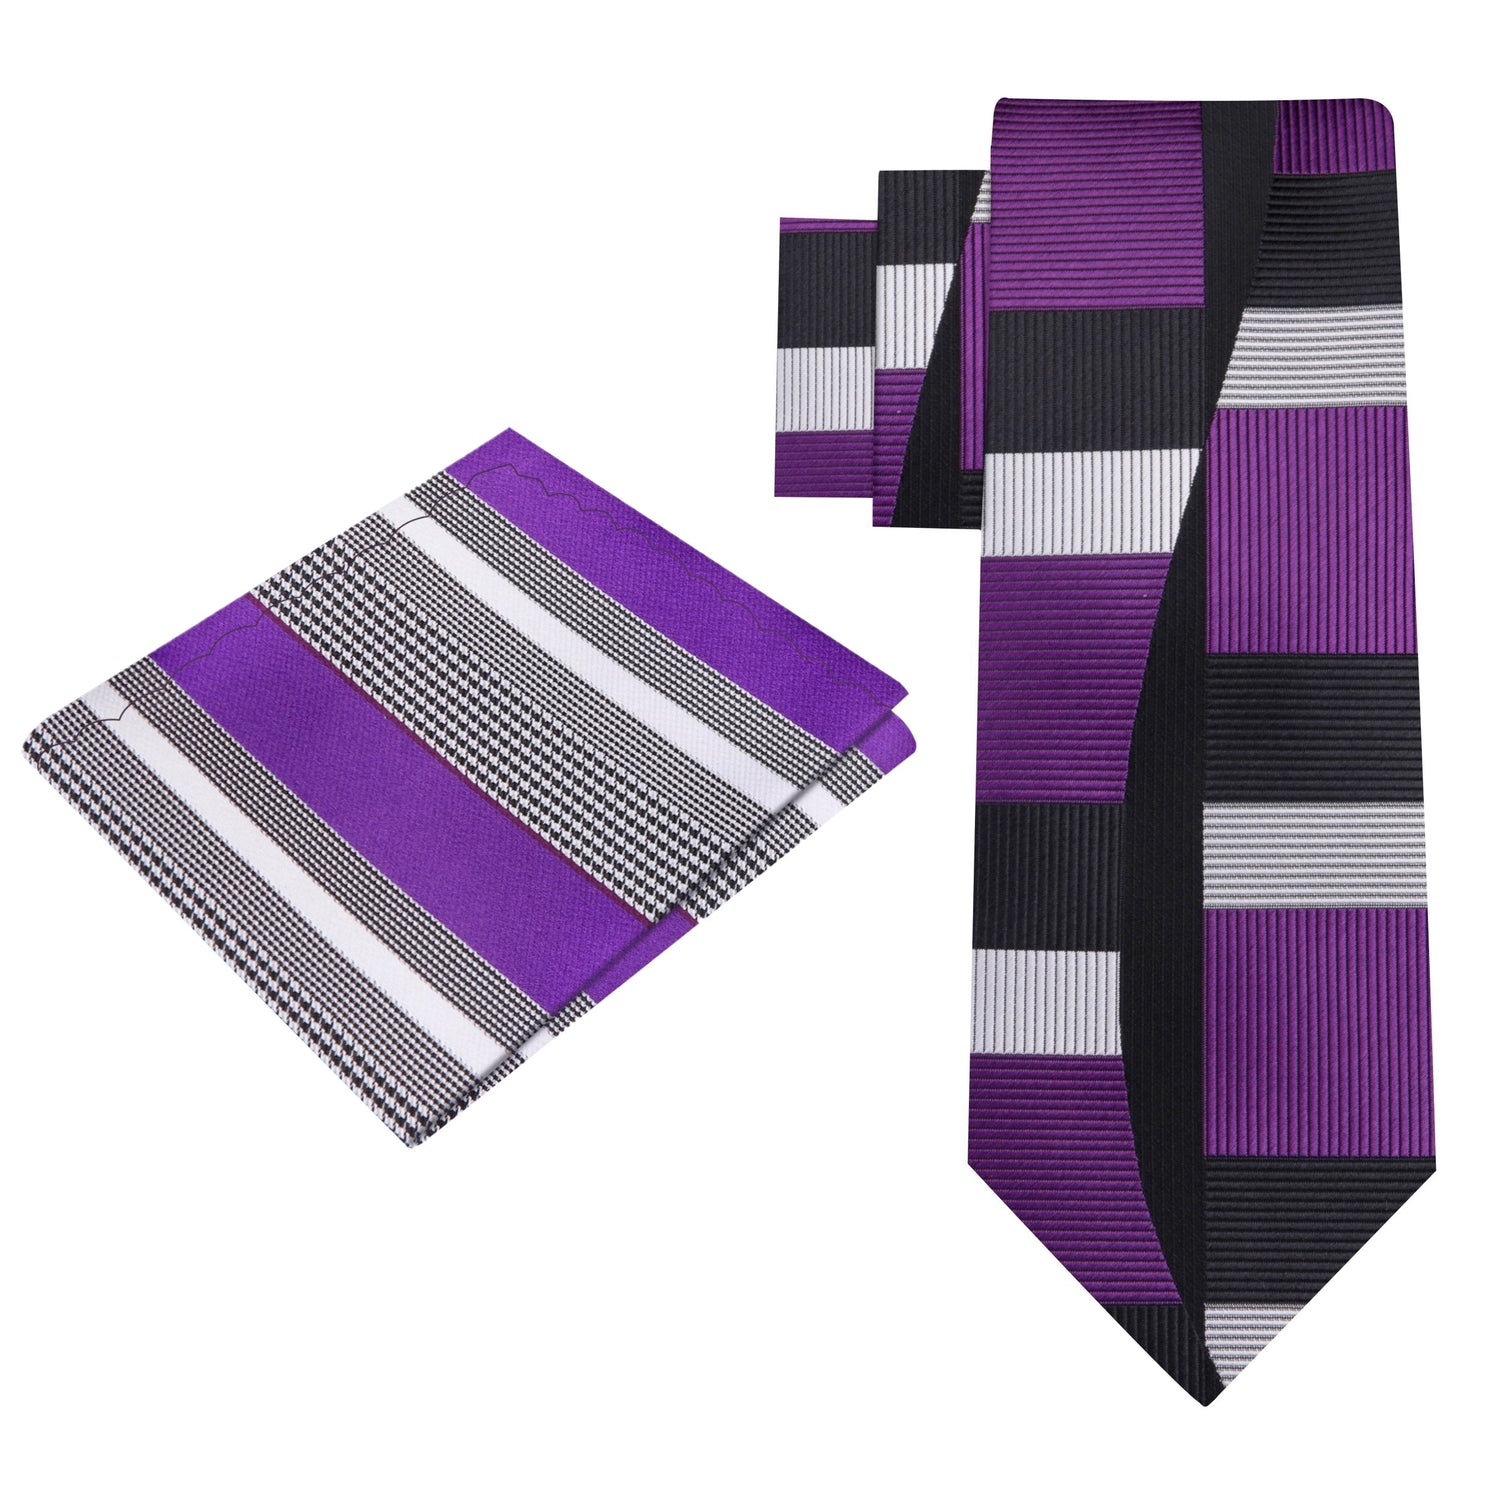 View 2: Purple, Black, Silver Abstract Tie and Pocket Square